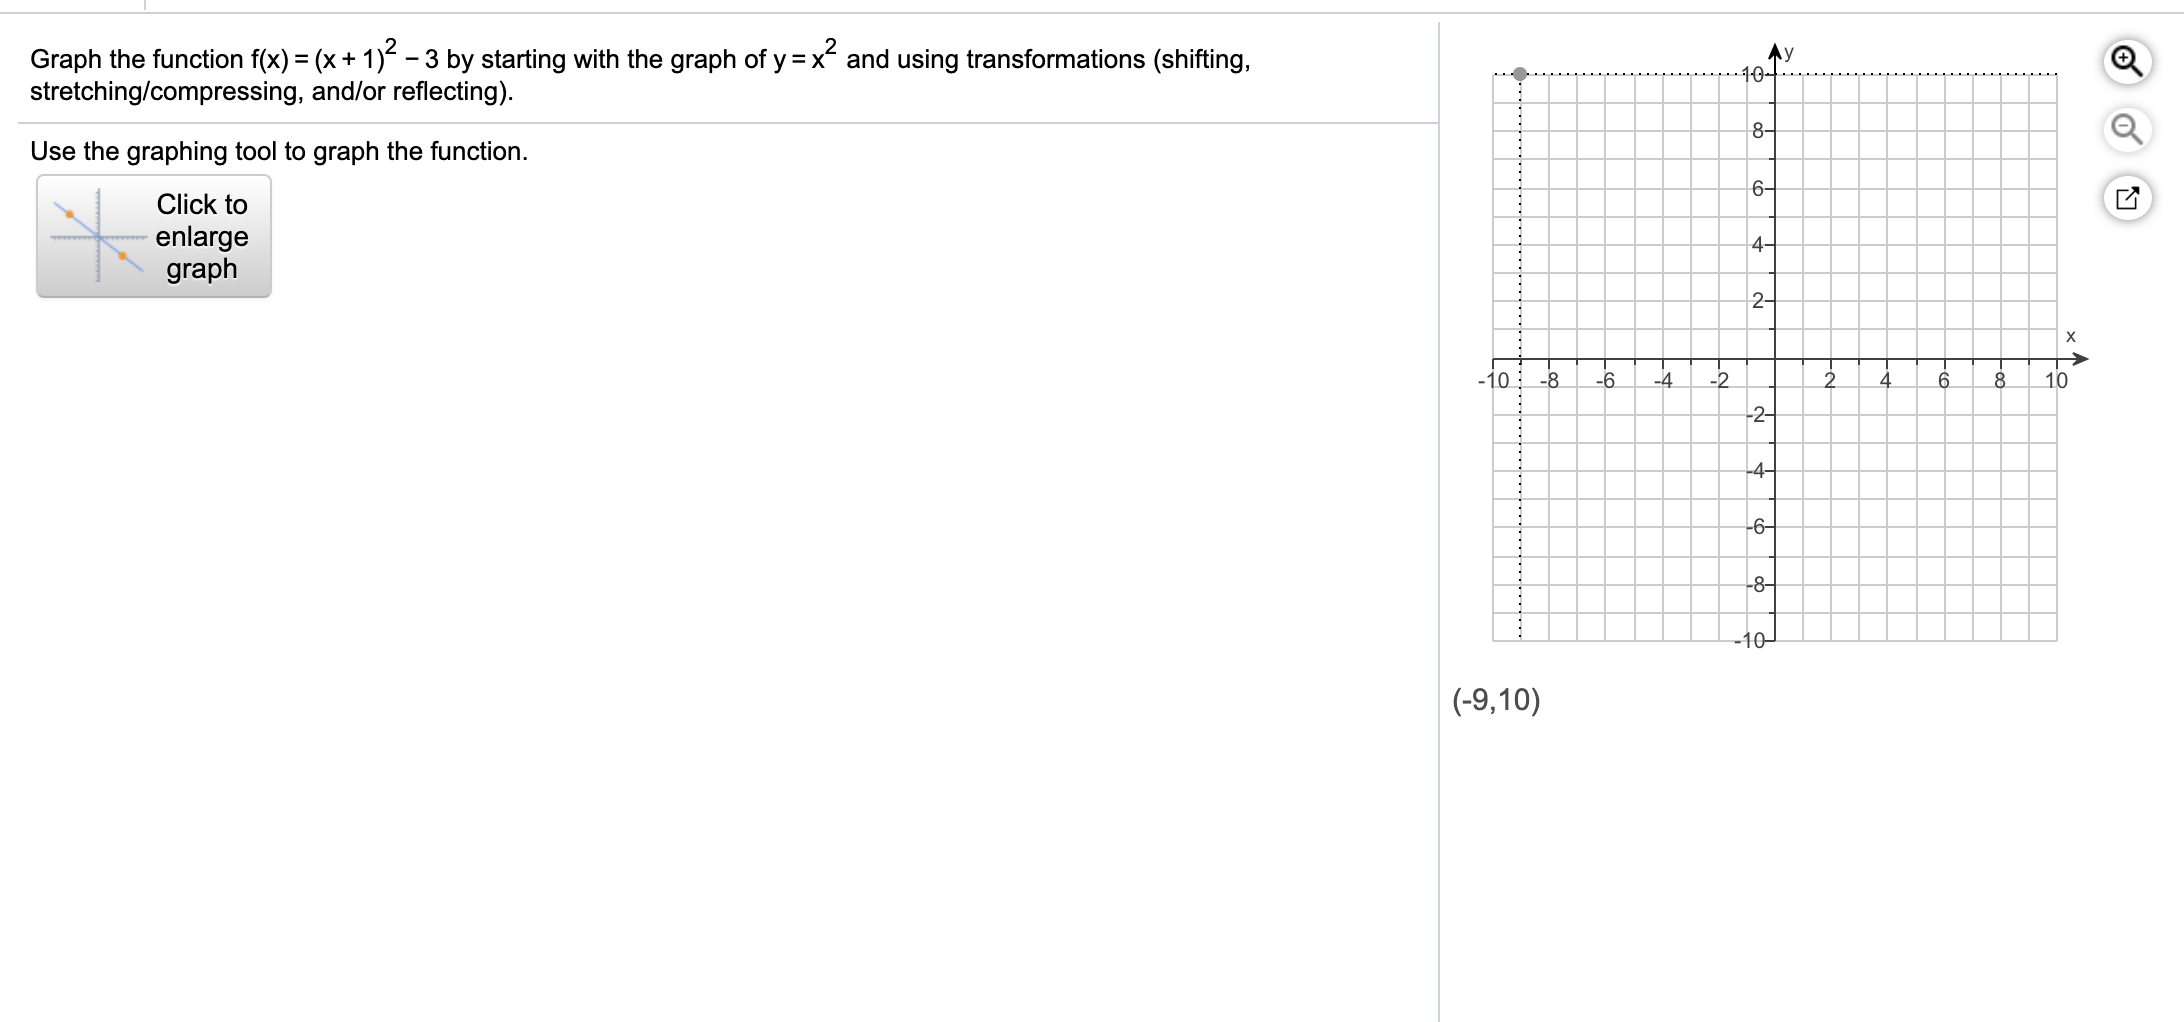 Graph the function f(x) = (x+ 1) - 3 by starting with the graph of y =x and using transformations (shifting,
stretching/compressing, and/or reflecting).
10-
8-
Use the graphing tool to graph the function.
6-
Click to
enlarge
graph
4-
2-
х
-10
-8
-6.
-2
2.
10
-4
-2-
-4-
-6-
-8–
-10-
(-9,10)
